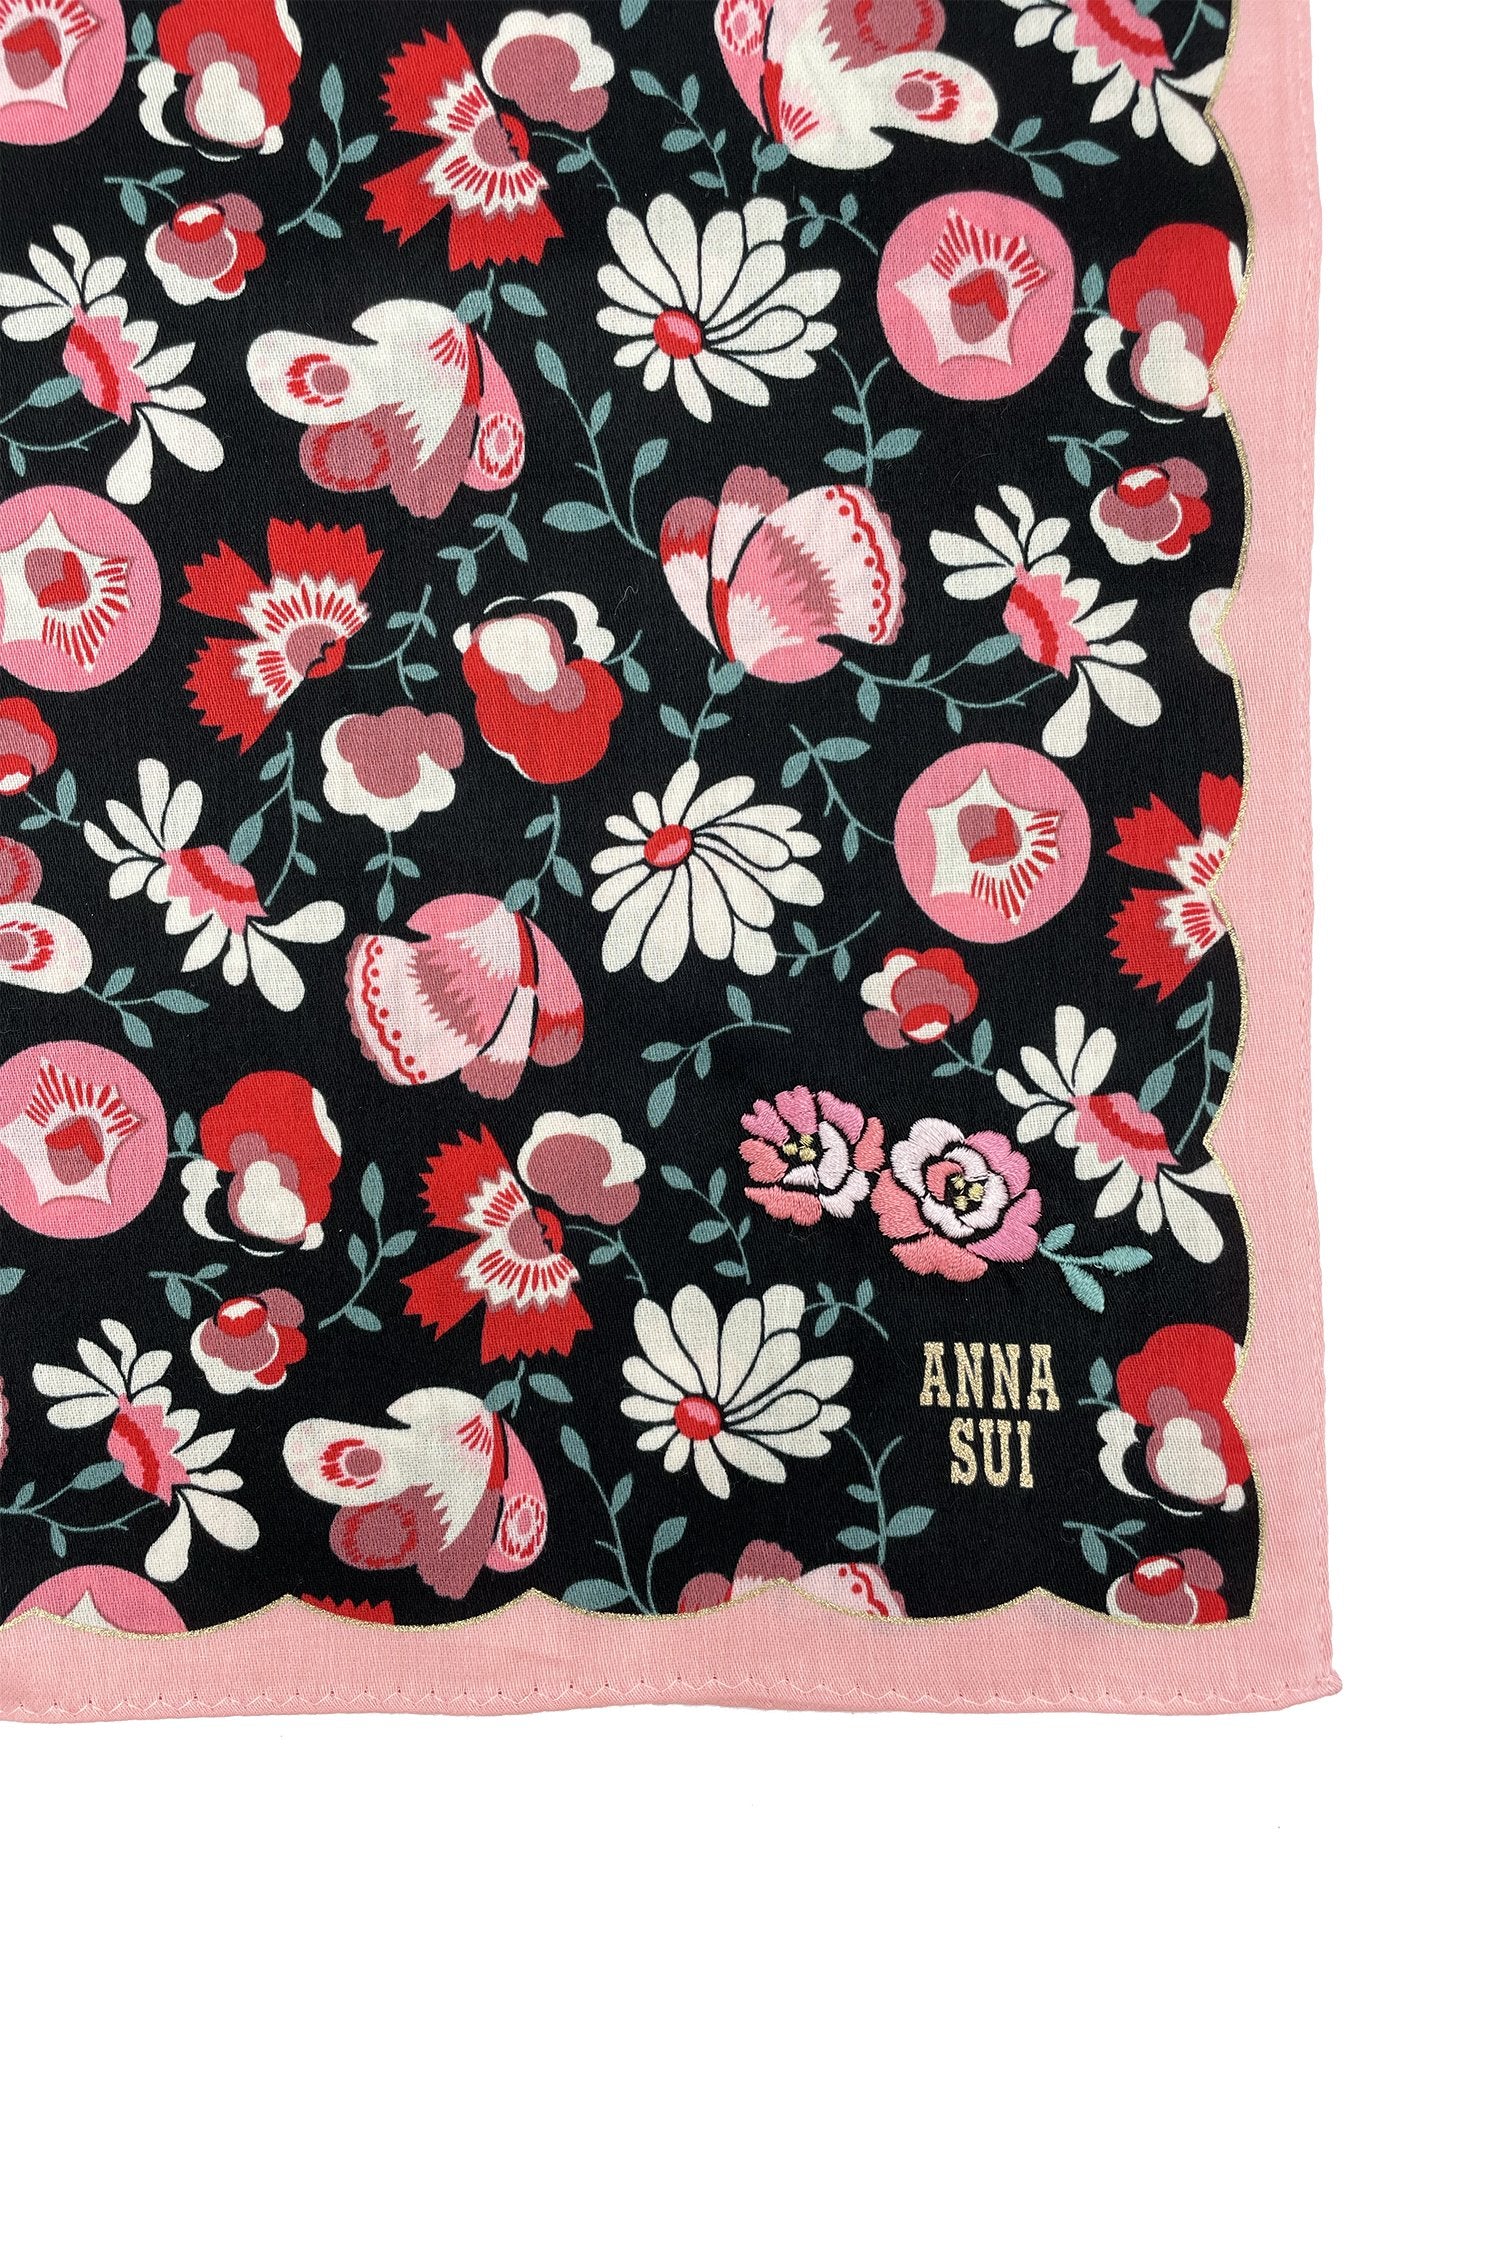 Handkerchief detail with white/ red daisy on black, baby pink hems, golden Anna’s label in corner